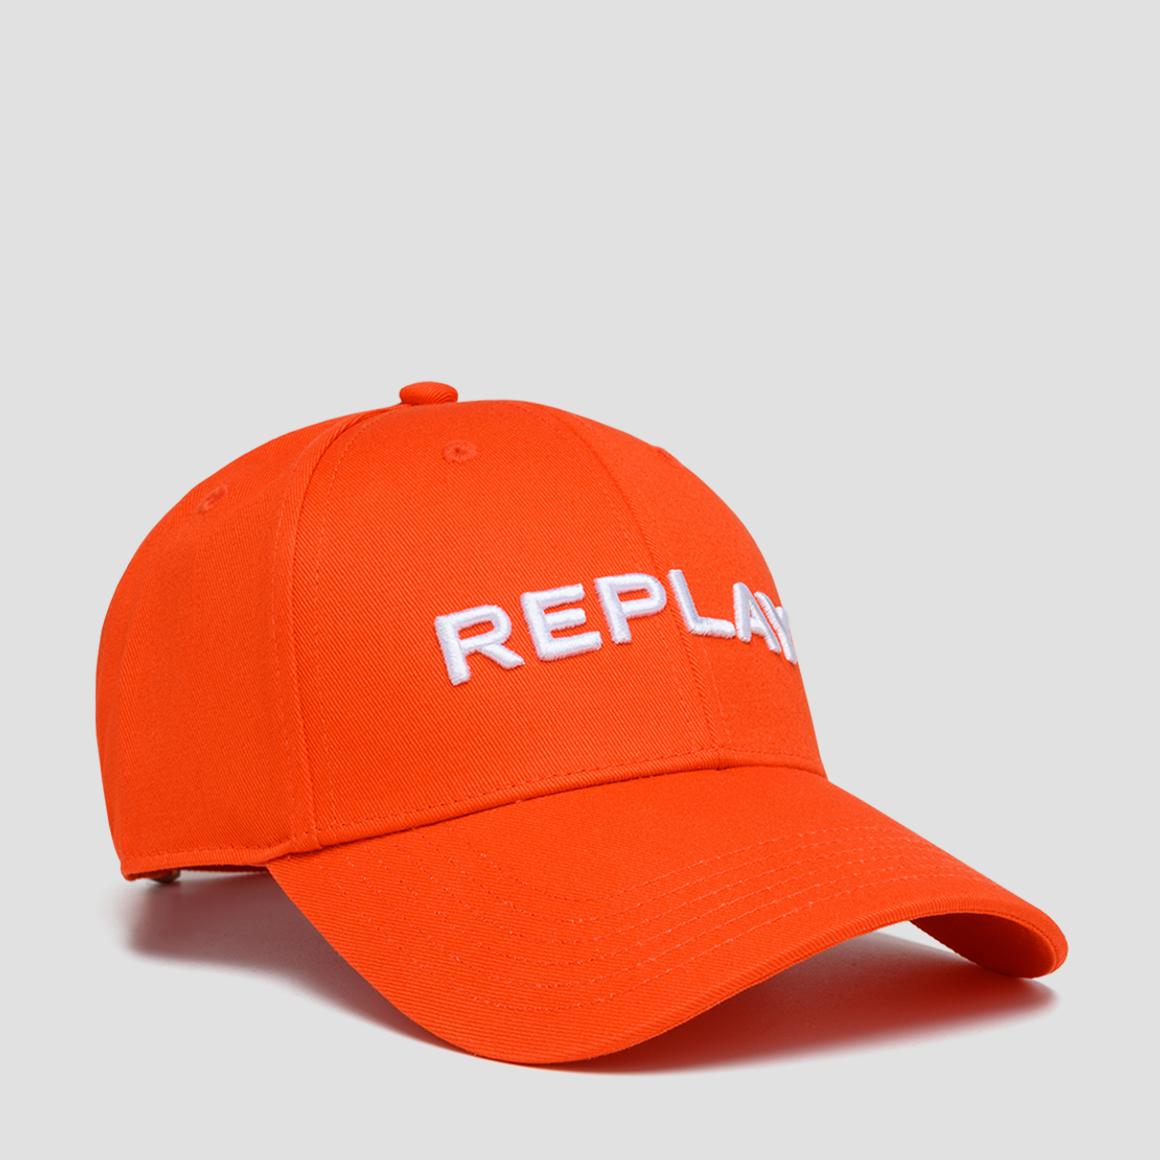 REPLAY COTTON CAP WITH BILL - AX4161.000.A0113 - ORANGE - The 515